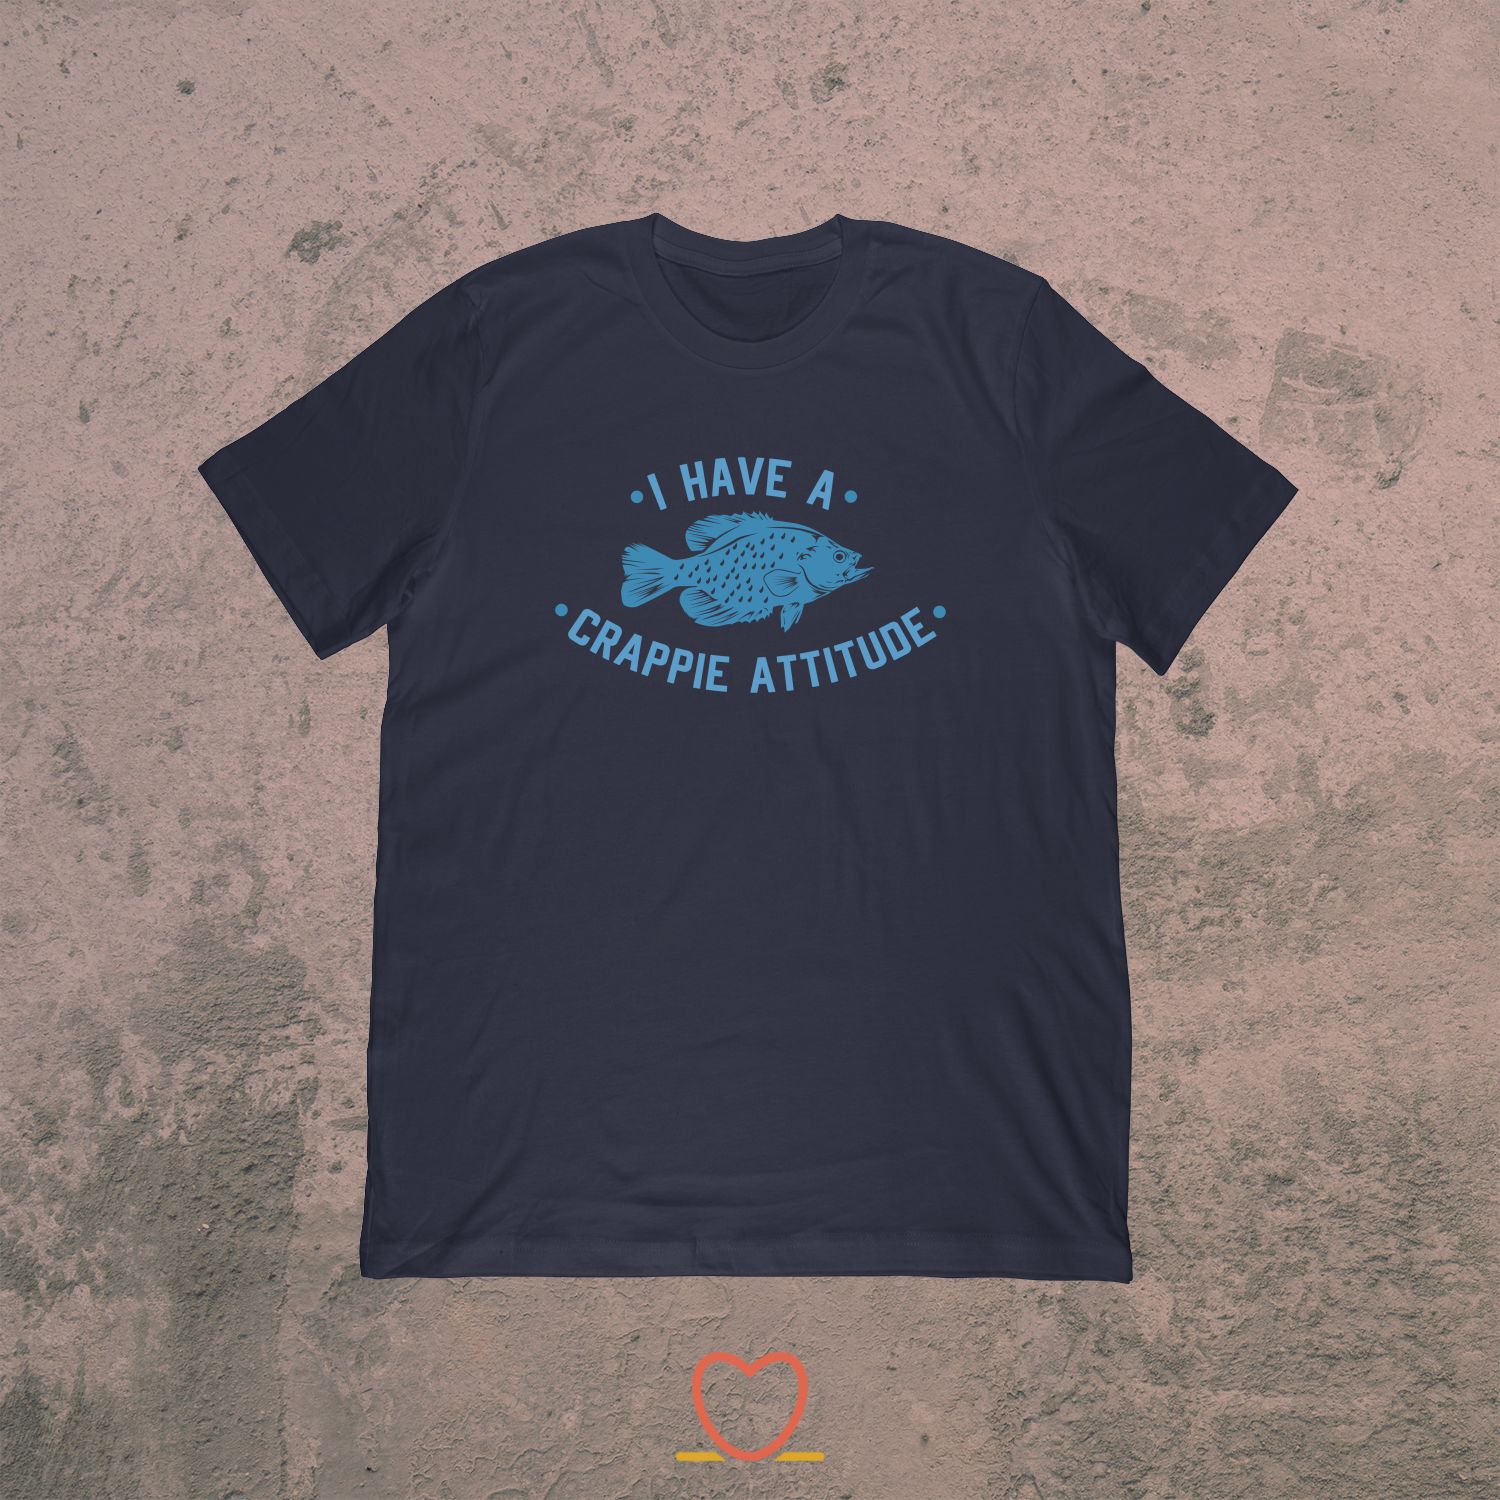 I Have A Crappie Attitude – Funny Fishing Tee